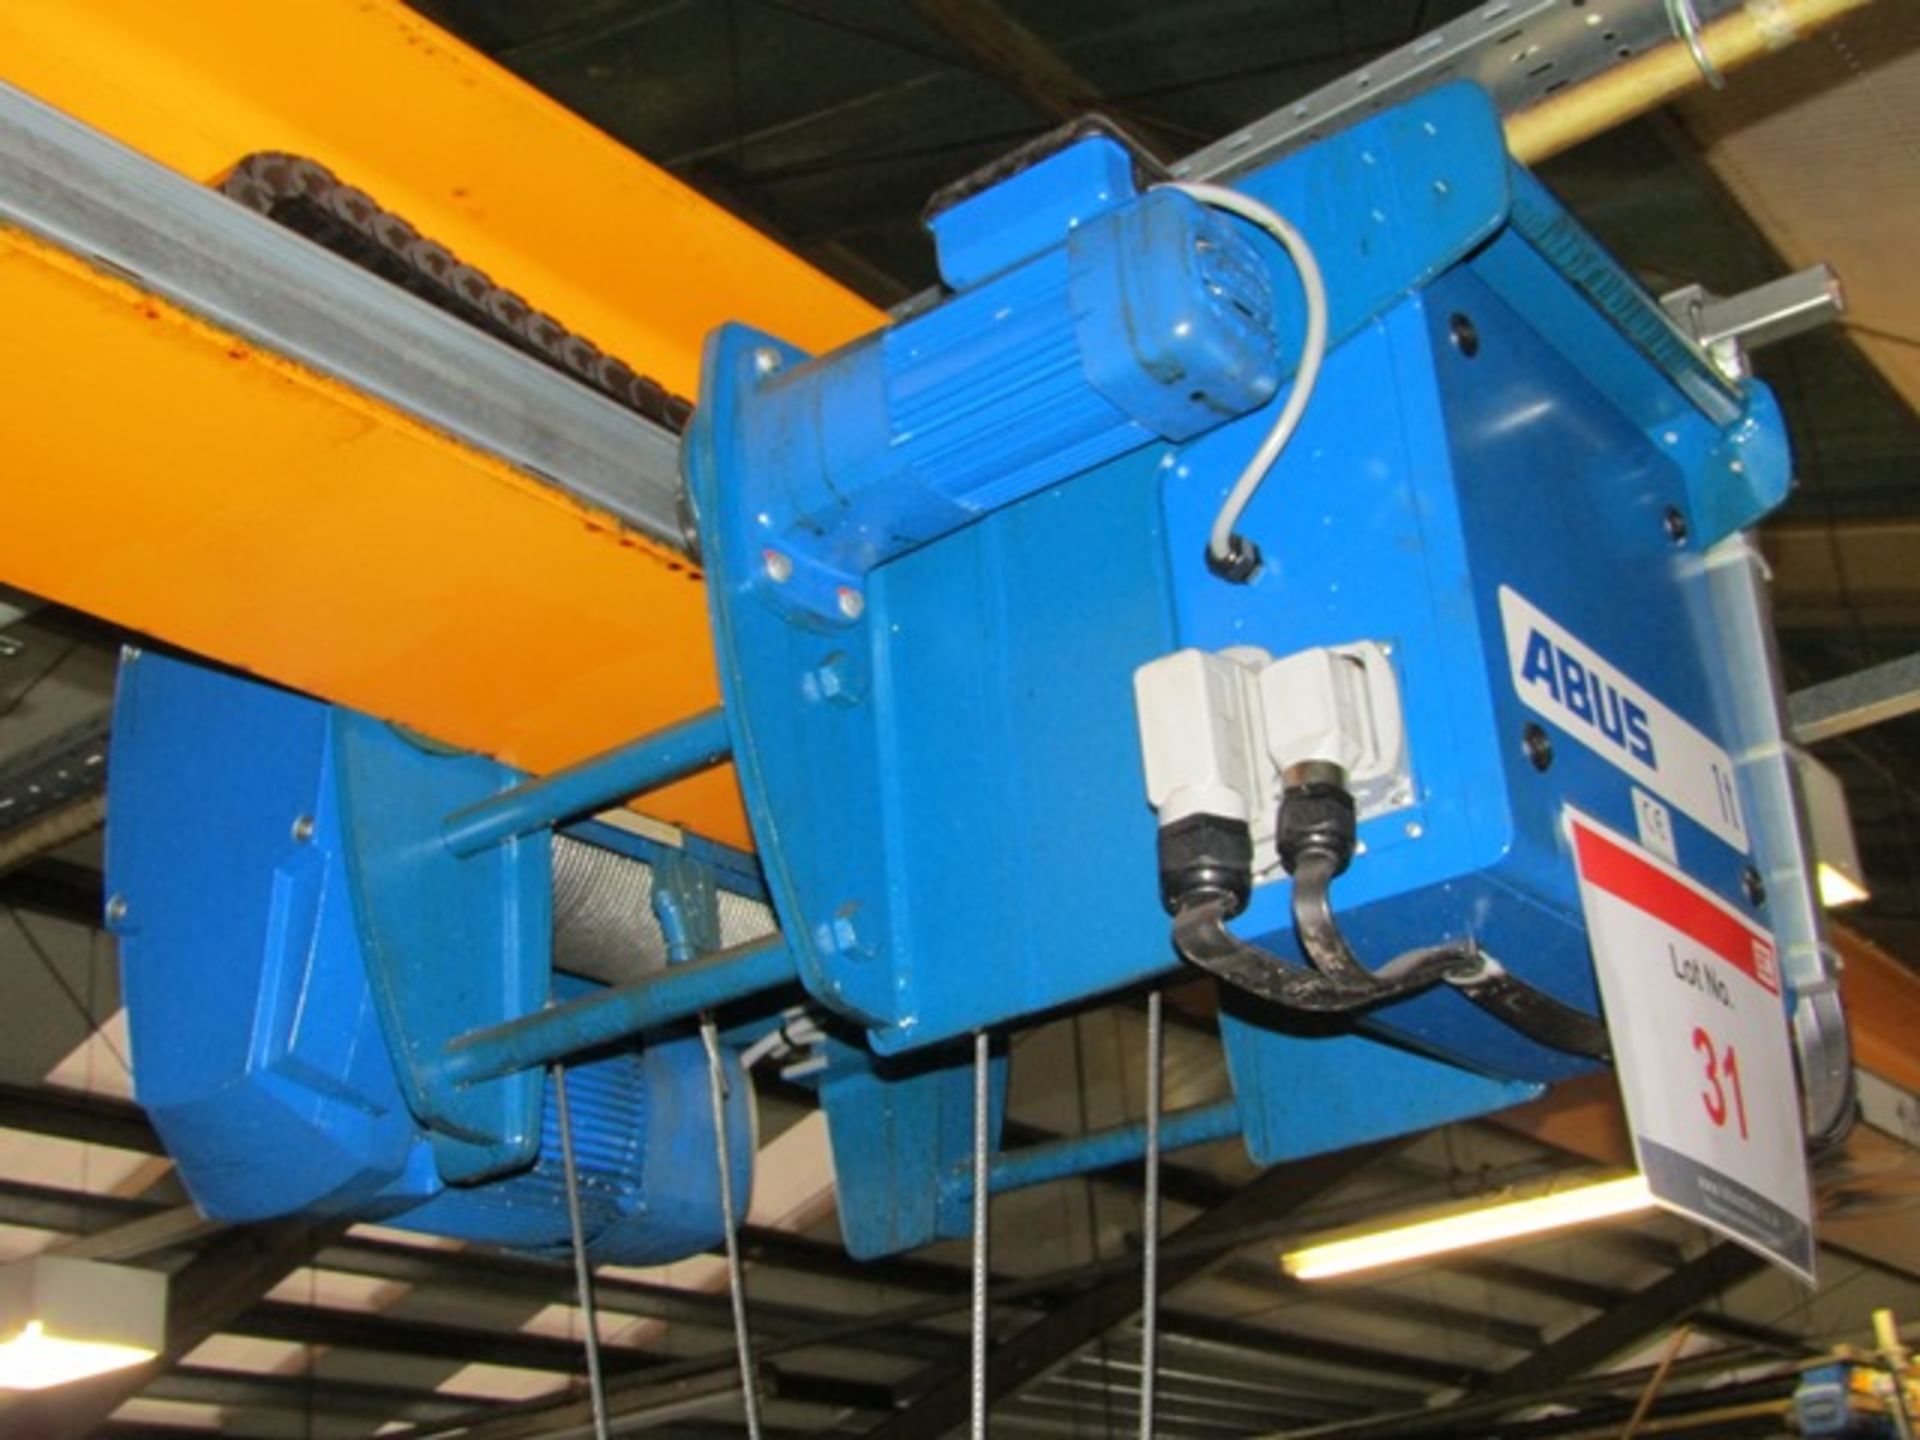 Abus 1 ton overhead travelling electric gantry crane, serial no: 16258516-1, approx 5.5m span x - Image 3 of 9